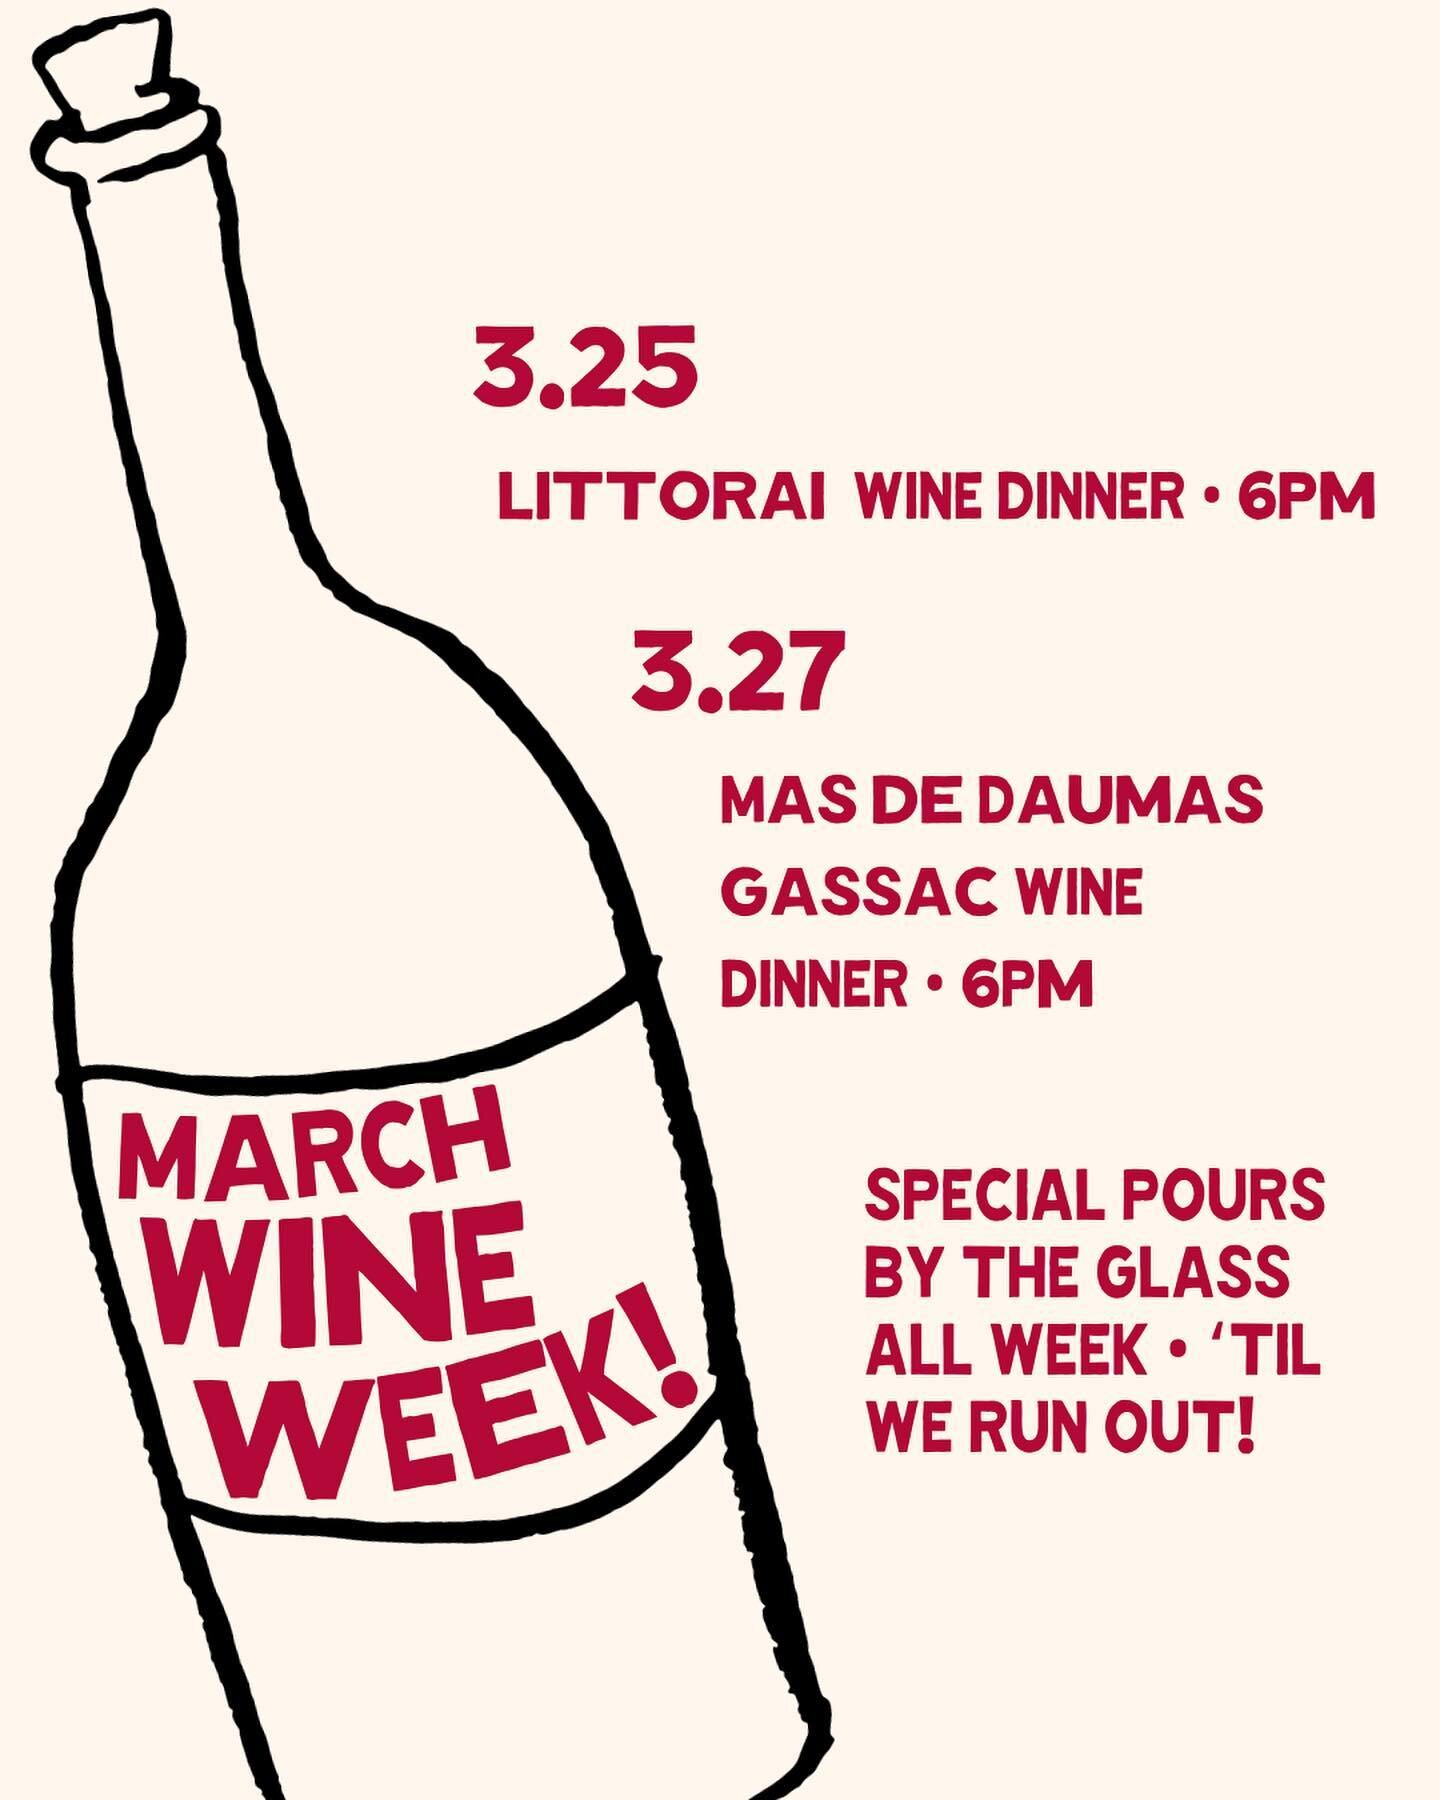 Party people! Mark your calendars. From wine dinners to Women&rsquo;s month, spring is shaping up. Peep our upcoming event calendar below: 

@unionsquarecafe &bull; Next week, Union Square Cafe is hosting a series of intimate wine dinners with a few 